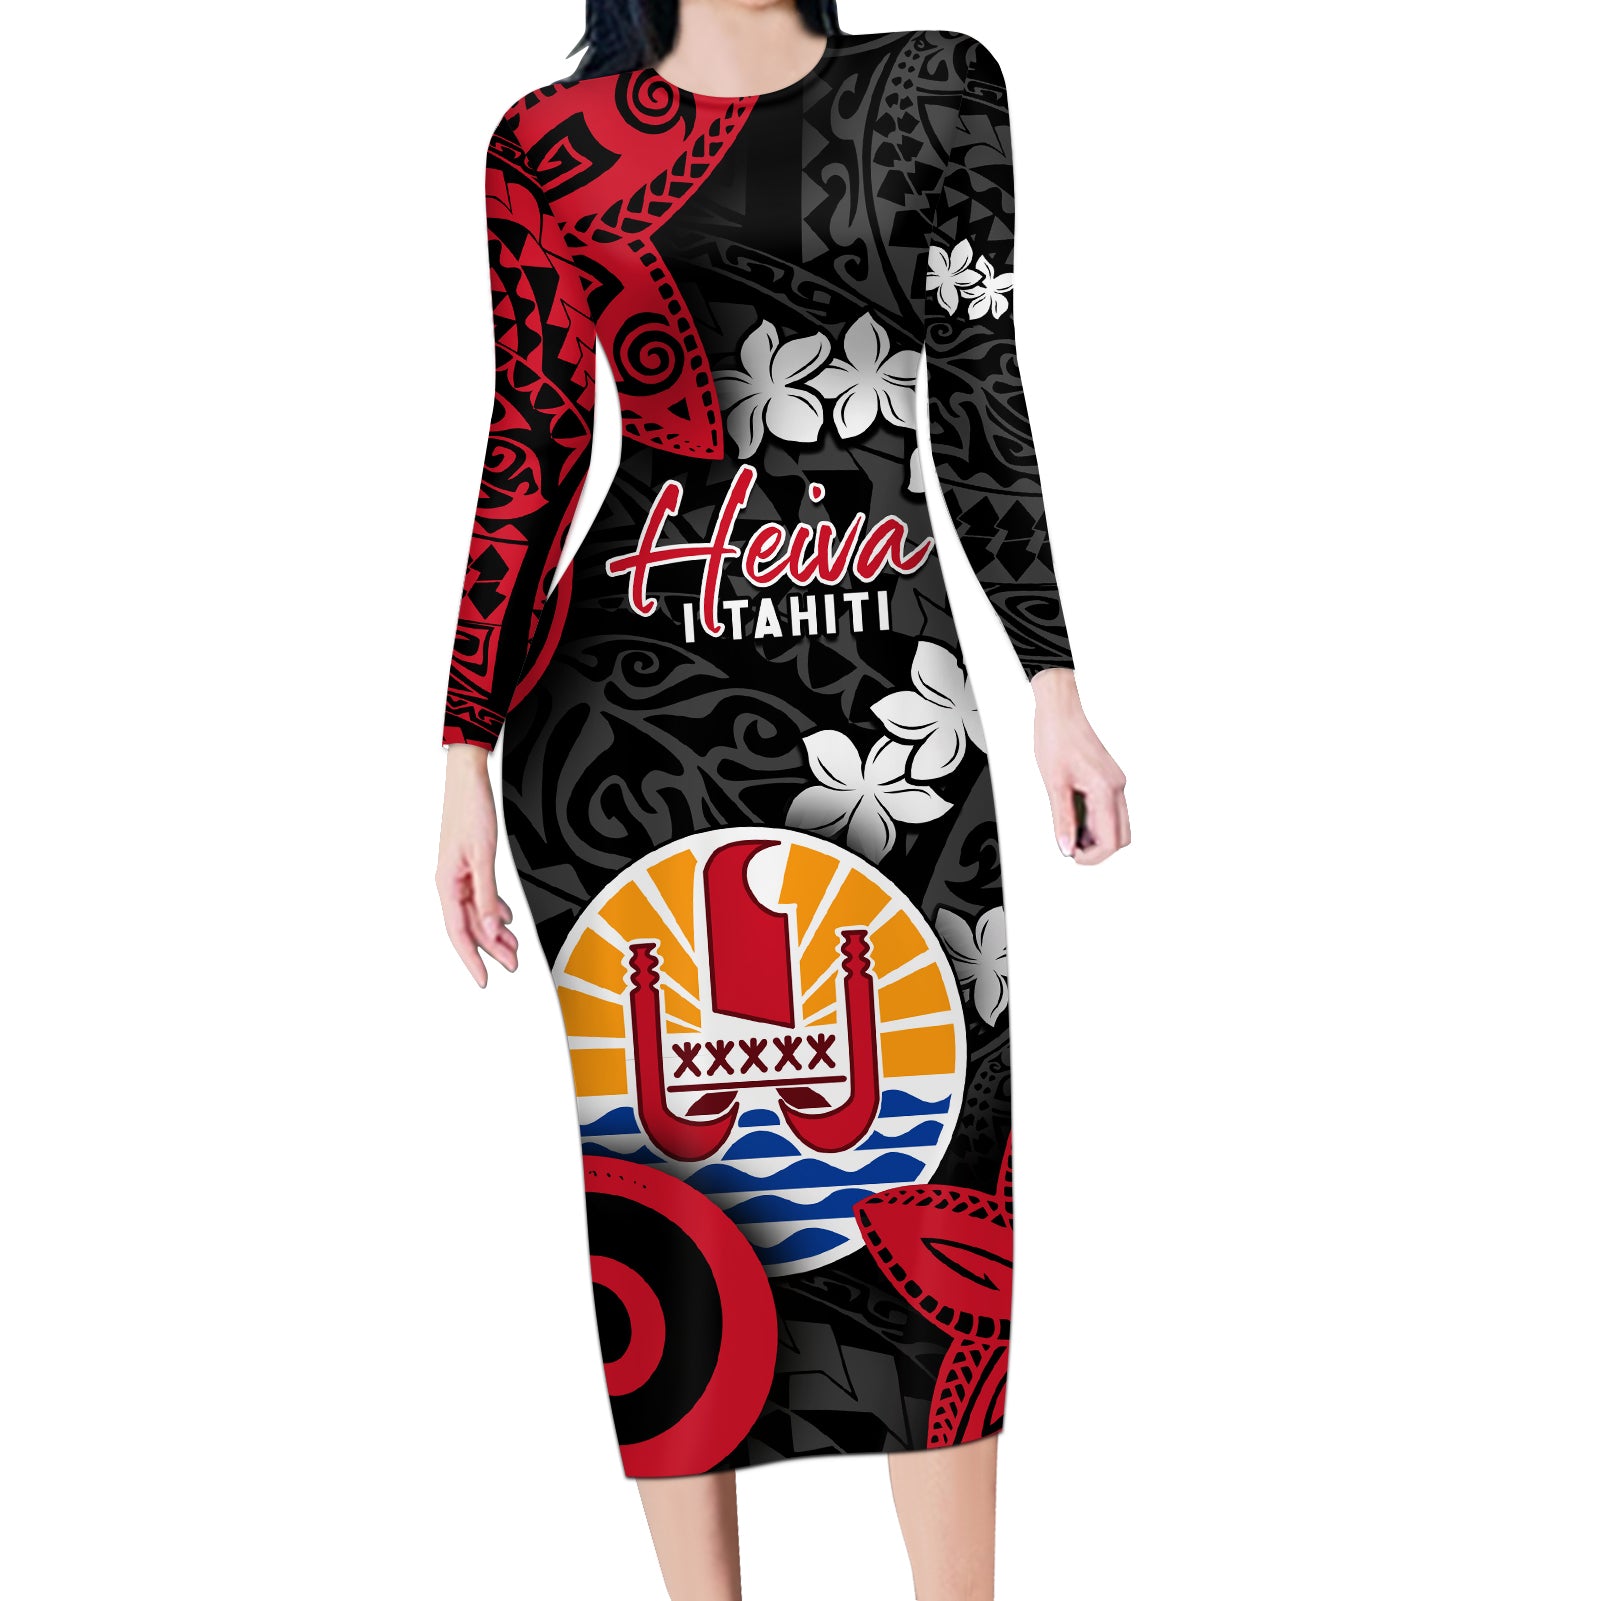 Tahiti Heiva Festival Long Sleeve Bodycon Dress Floral Pattern With Coat Of Arms